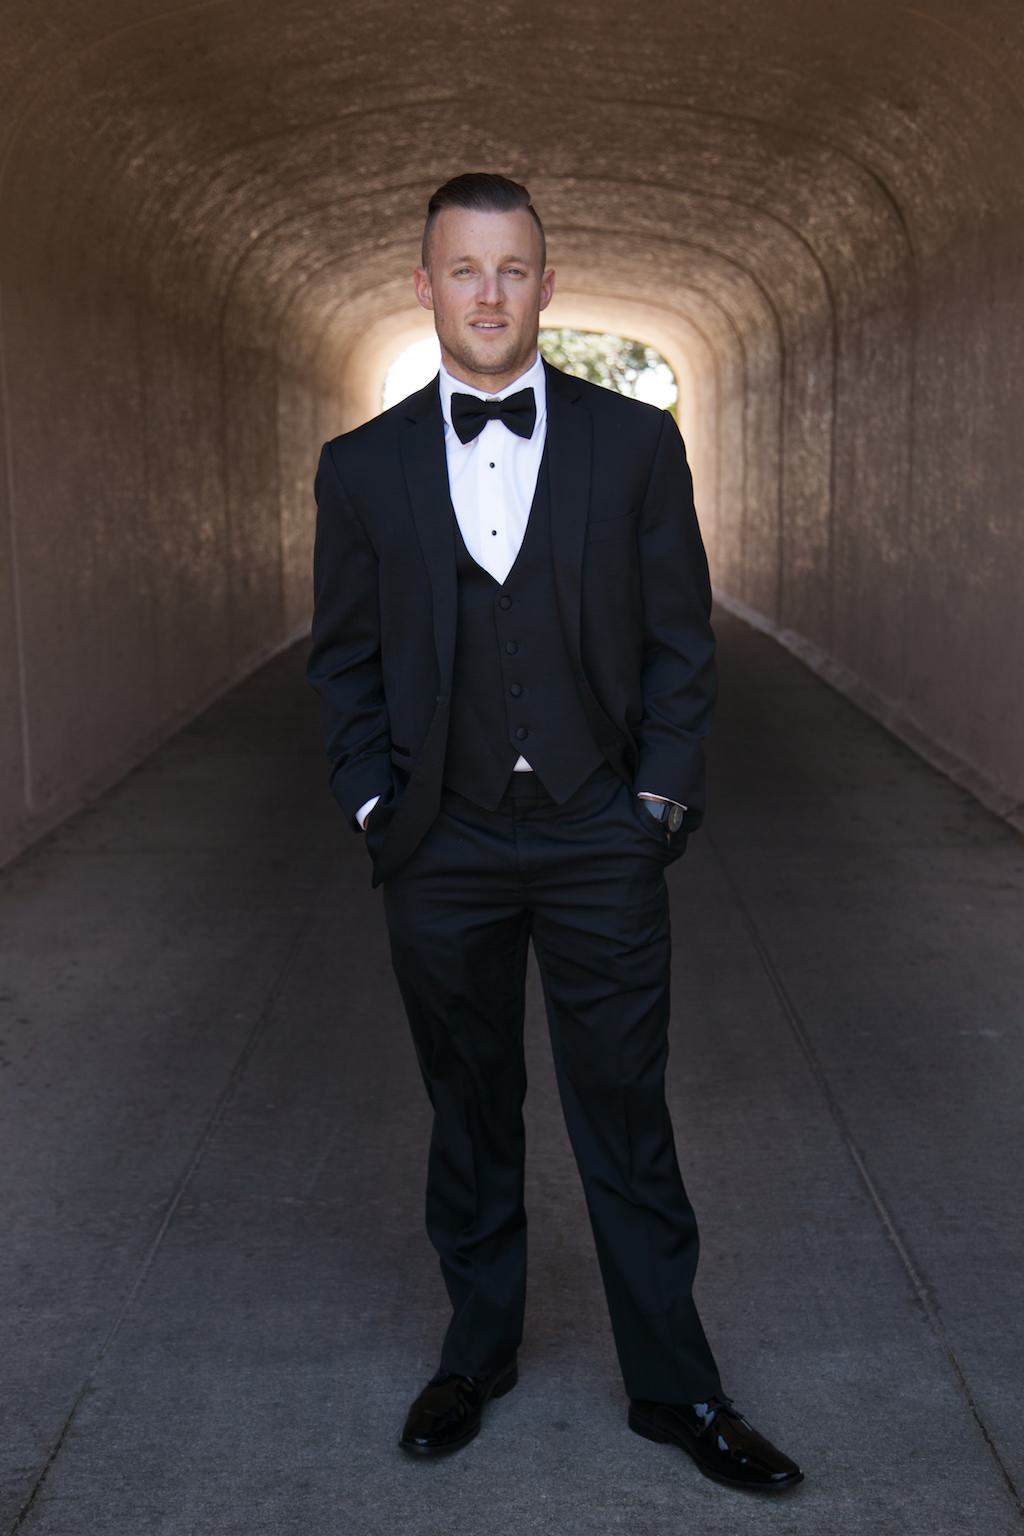 Groom Portrait with Black Tuxedo and Bowtie | Sarasota Wedding Photographer Carrie Wildes Photography